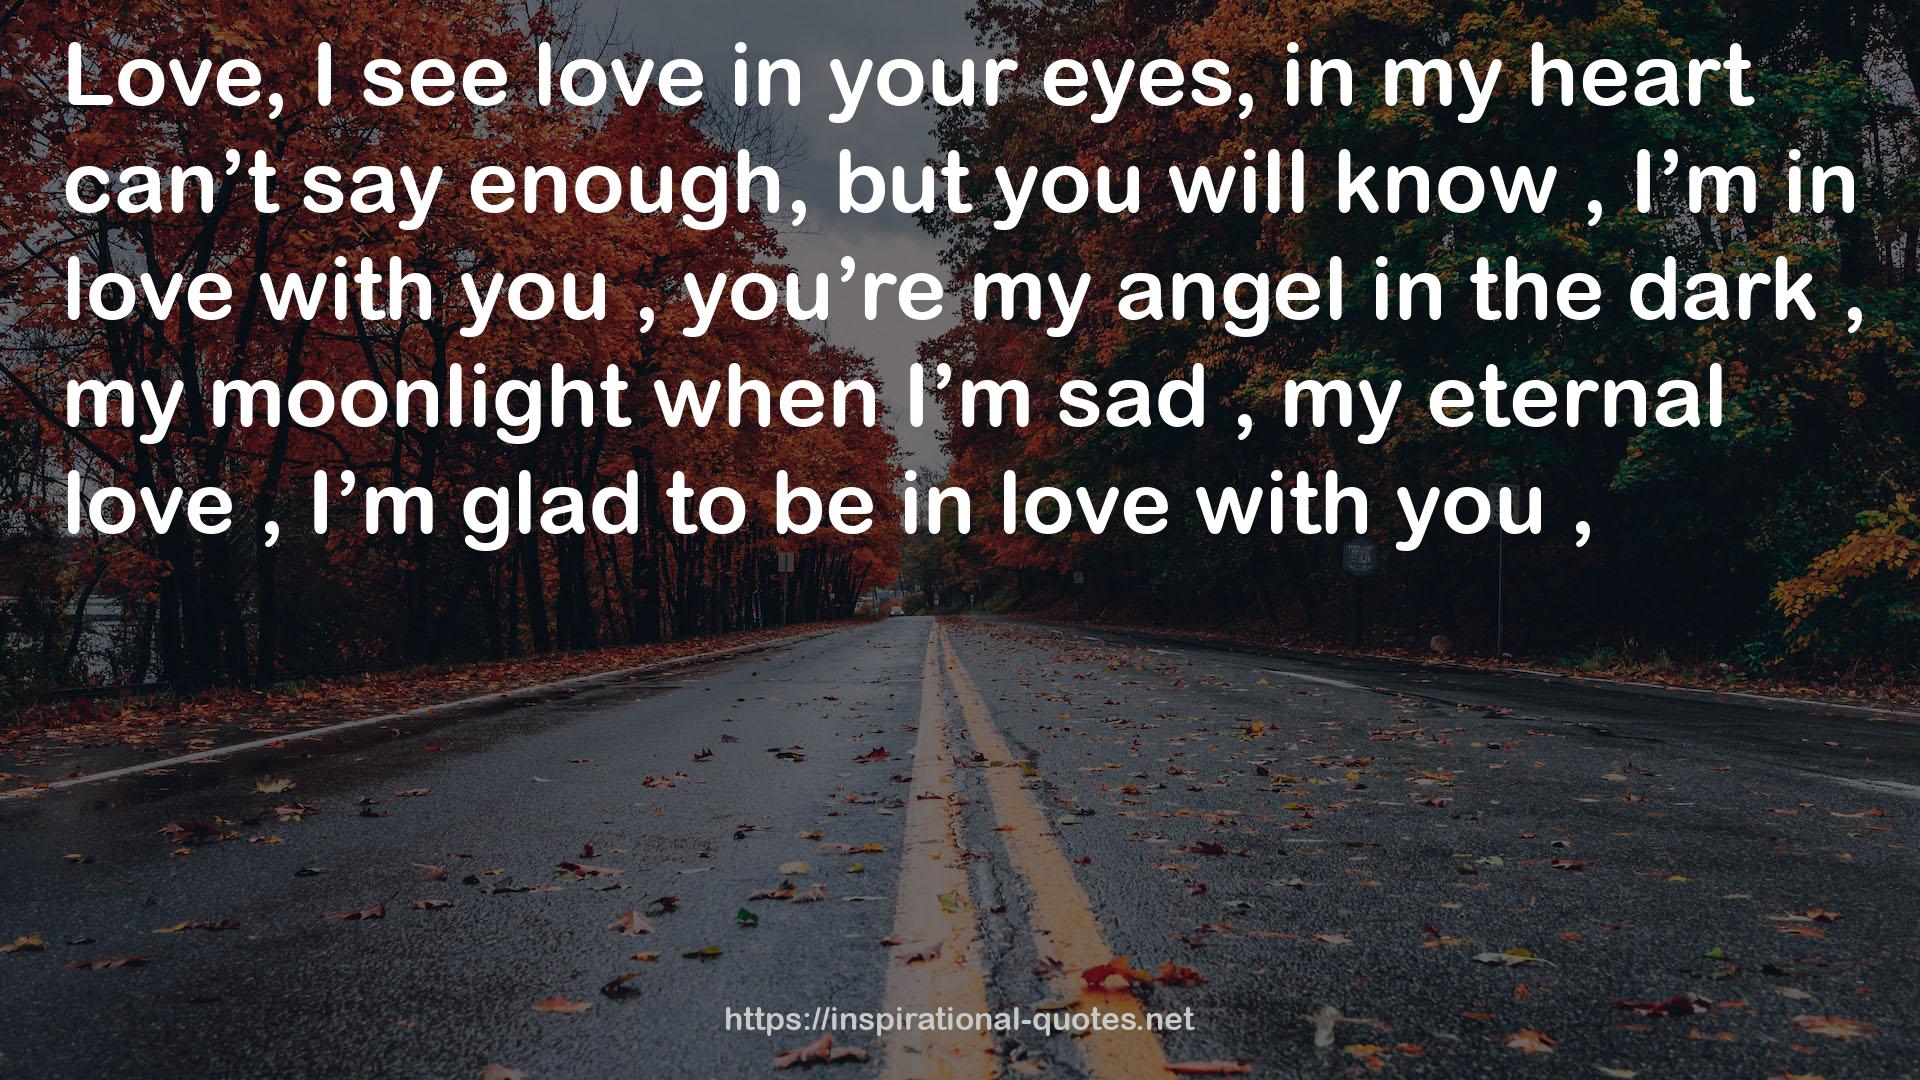 my eternal love  QUOTES